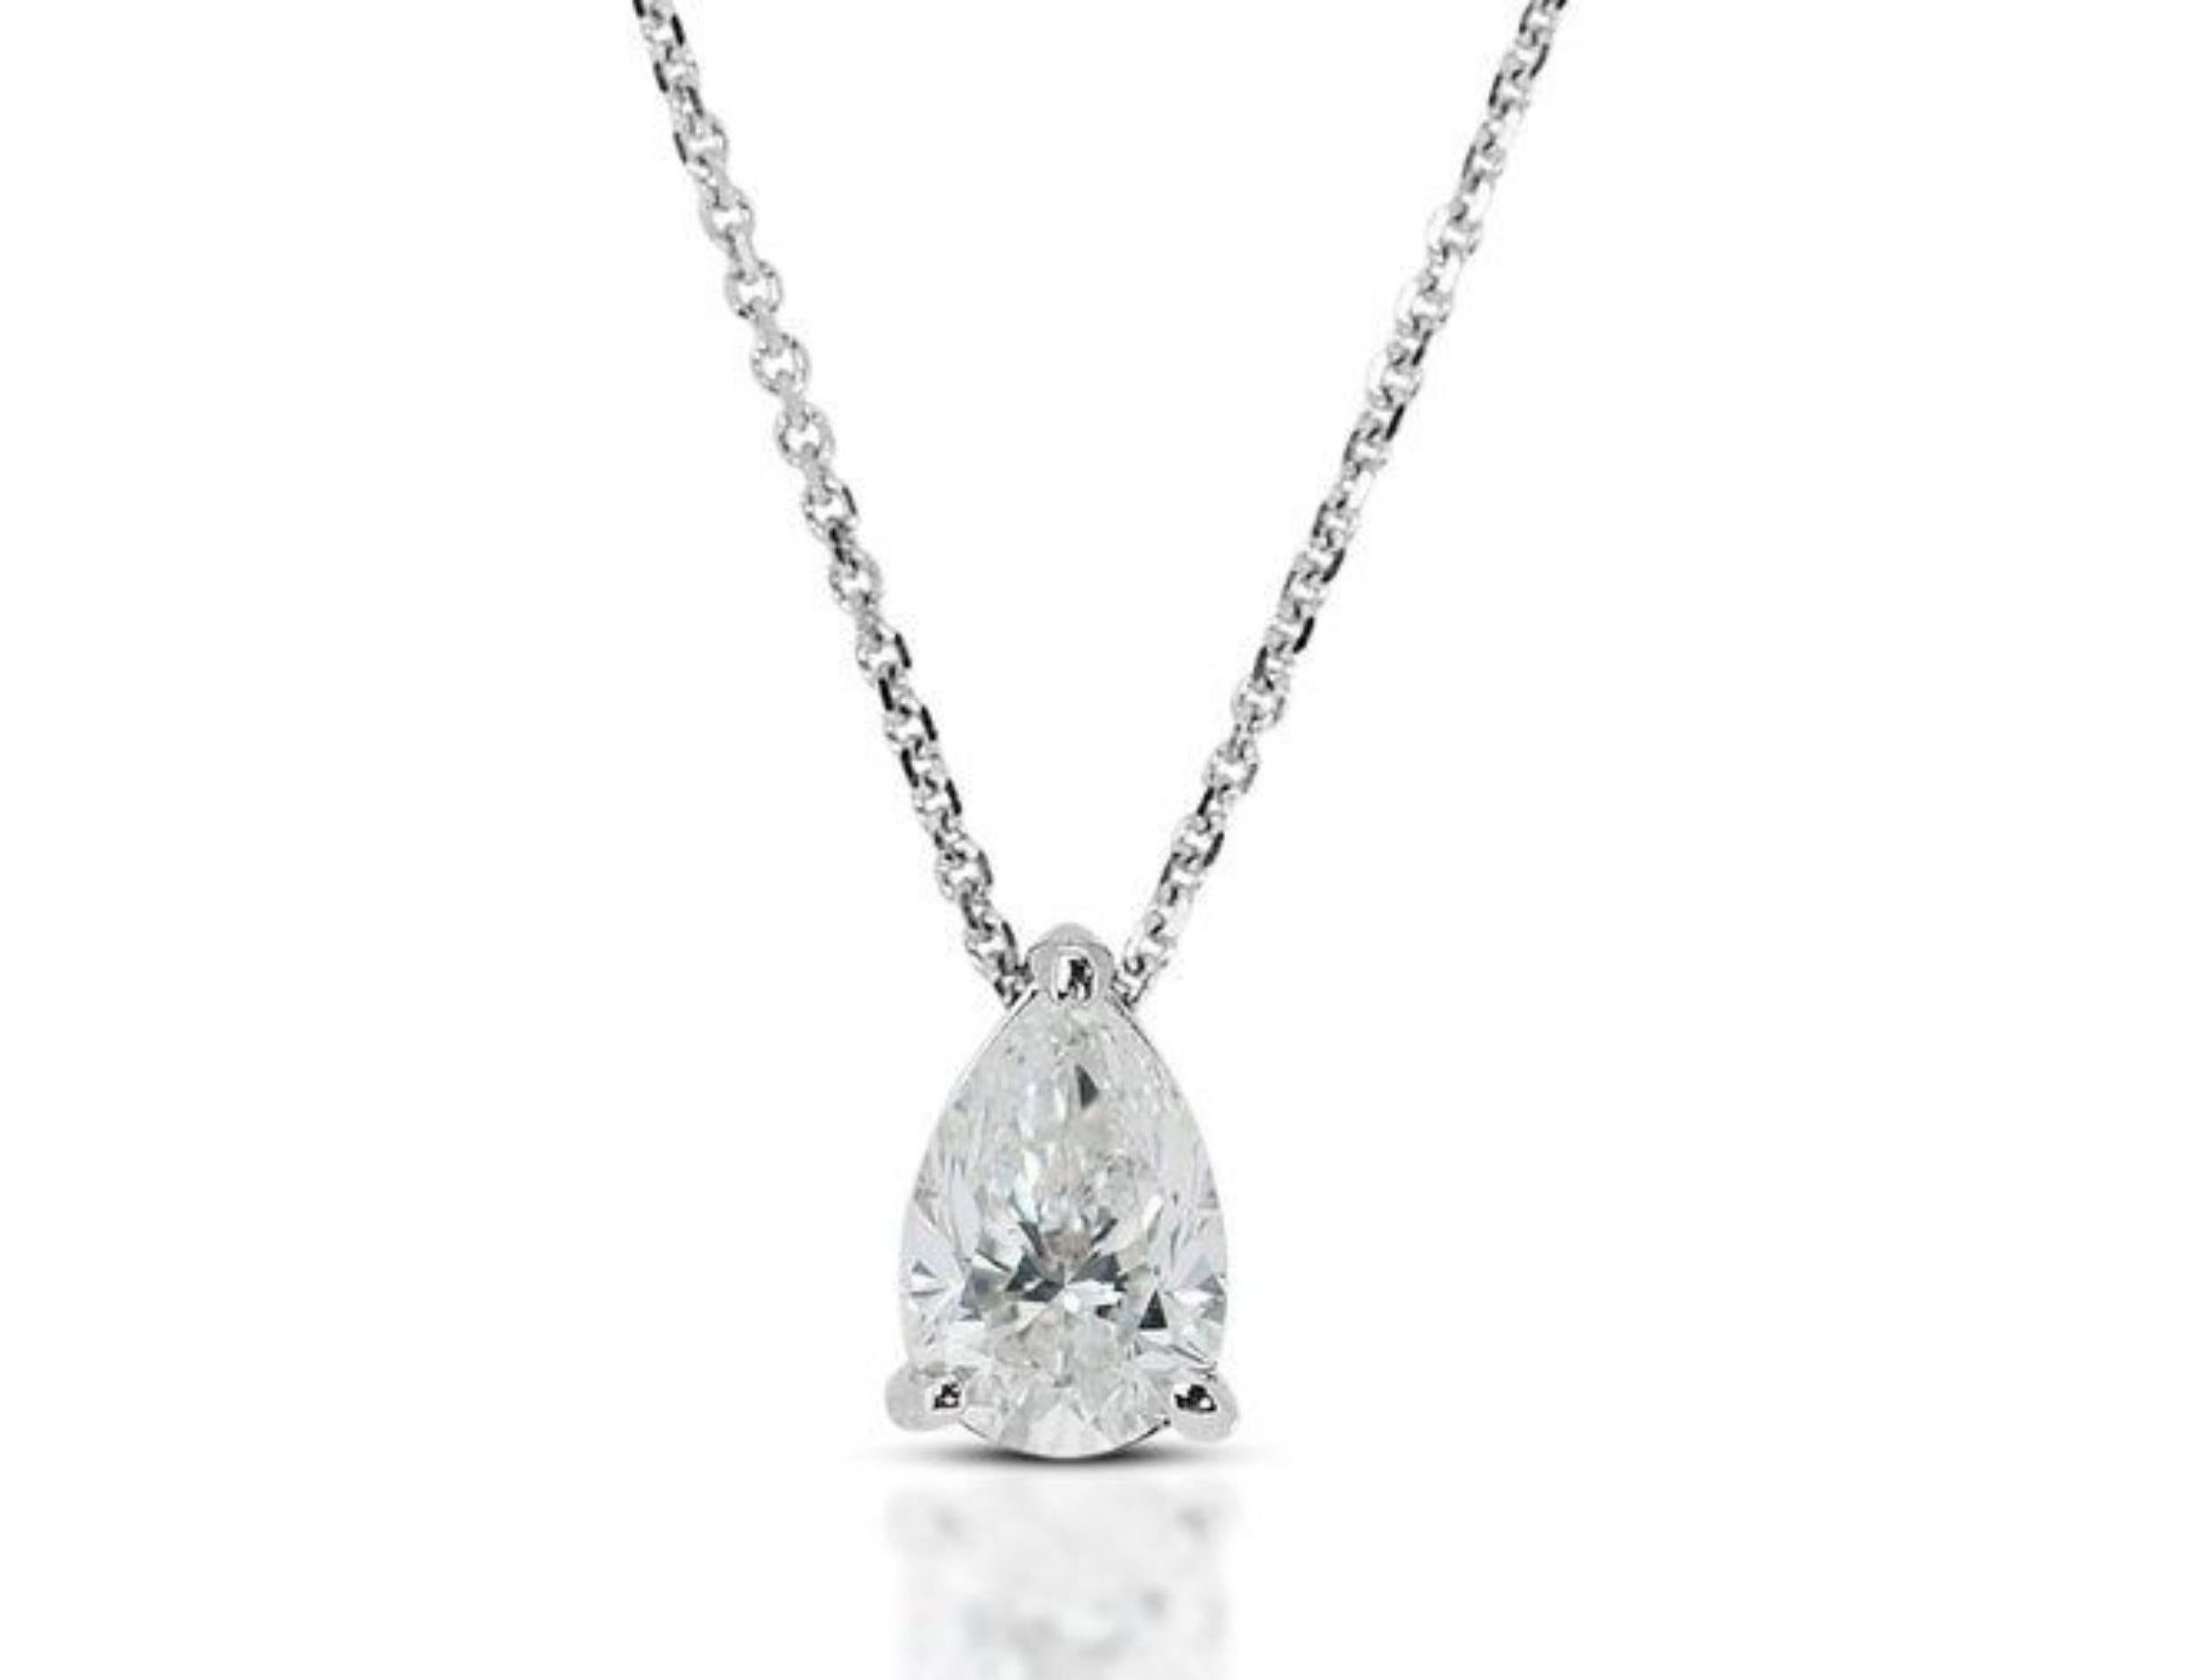 Shimmering 0.7 Carat Pear Brilliant Diamond Necklace in 18K White Gold (GIA Certified). This captivating necklace showcases a breathtaking 0.7 carat pear brilliant diamond, certified by the prestigious GIA (7471939615). The radiant H color and SI1